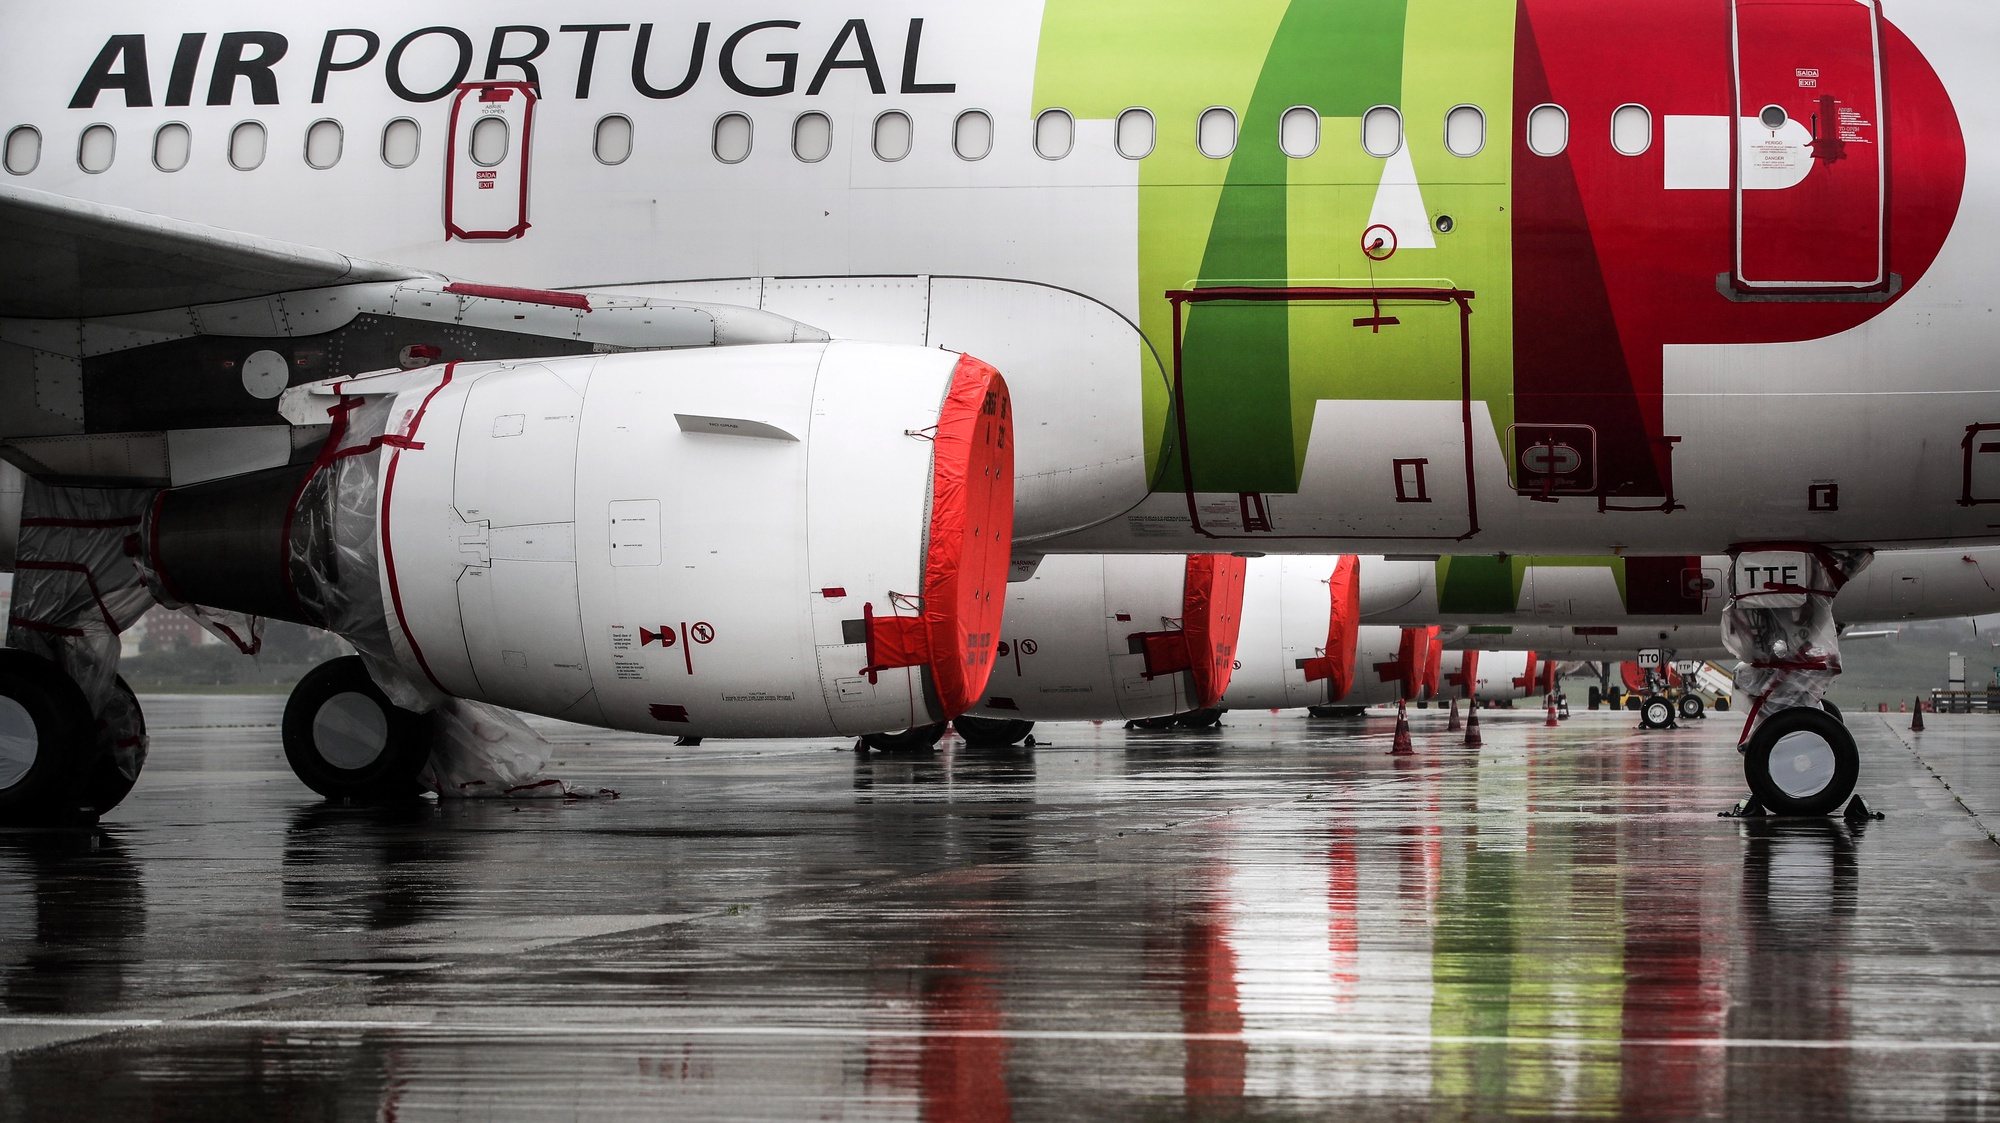 File photo dated from 09 April 2020 of TAP aircraft engines cover with plastic foil remain grounded at Humberto Delgado airport closed for passenger traffic as part of the exceptional traffic measures to combat the epidemiological situation of Covid-19, in Lisbon, Portugal, 09 April 2020 (reissued 02 July 2020). The granting of state support to TAP has been under discussion since the airline&#039;s activity came to a standstill because of the coronavirus pandemic, with an agreed injection of up to 1,200 million euros. MARIO CRUZ/LUSA